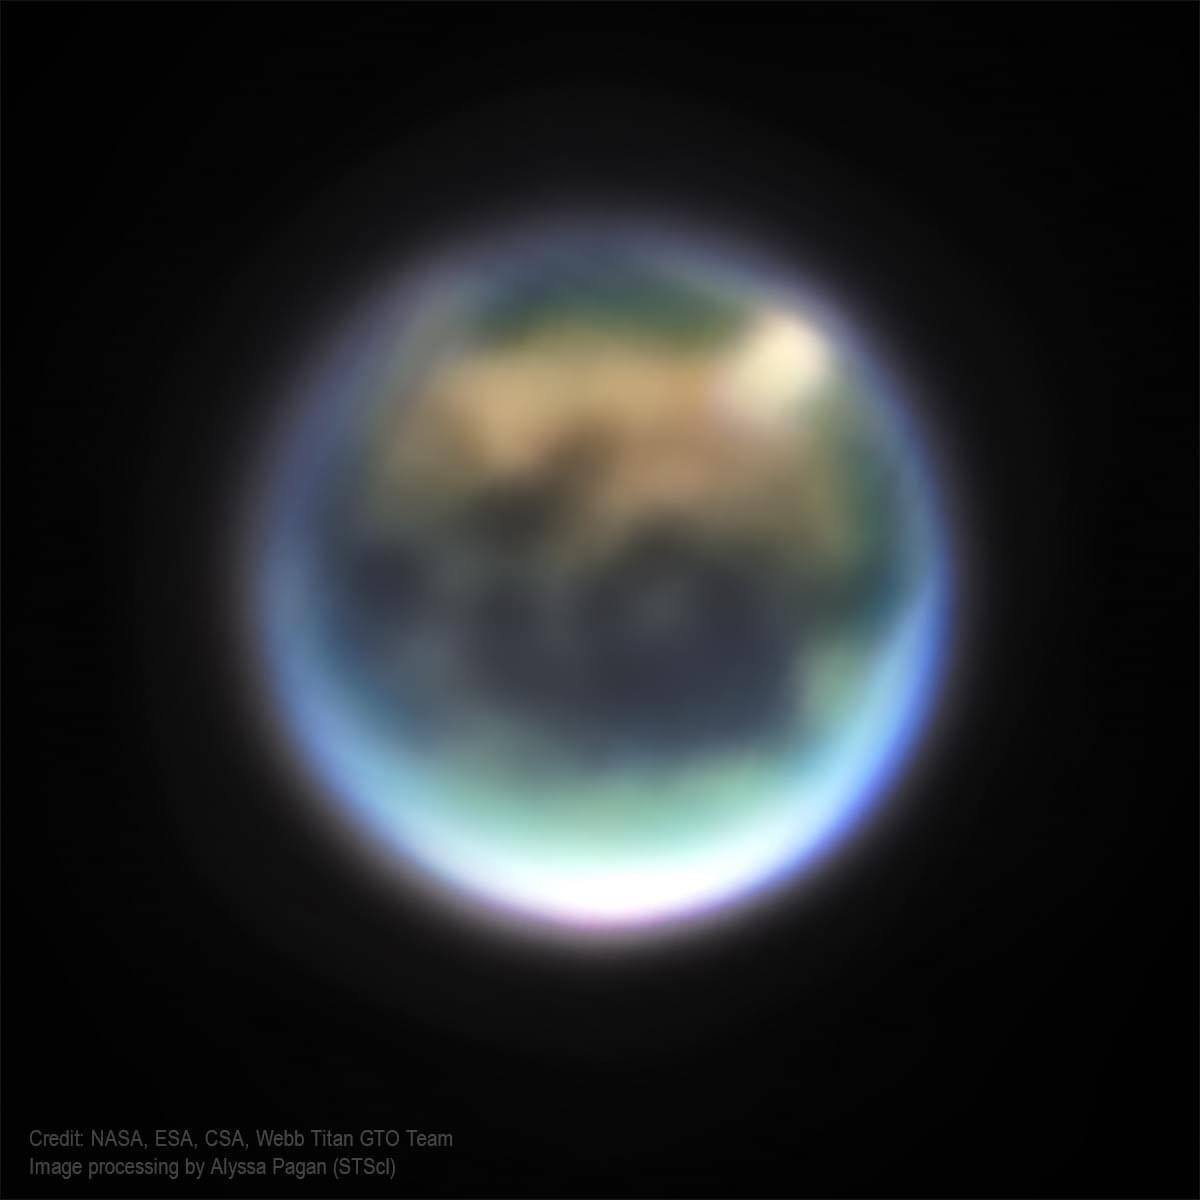 A blurred photo of Earth? Nope, this is Titan, Saturn’s largest Moon captured by NASA's James Webb Space Telescope.